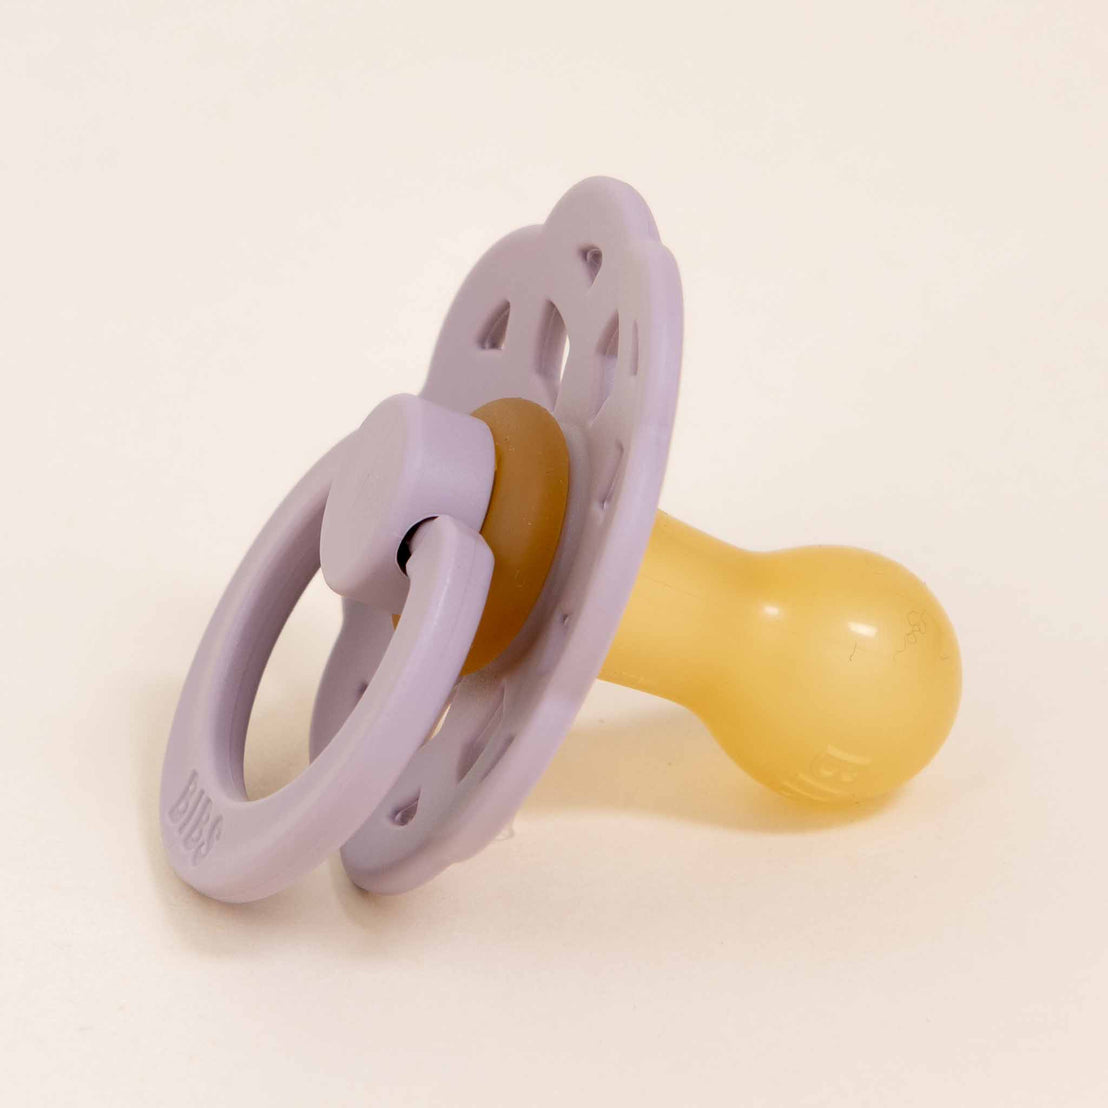 A Bibs Lace Pacifier in Dusky Lilac with a lavender shield and handle, featuring a yellow nipple, designed in Denmark, set against a light beige background.